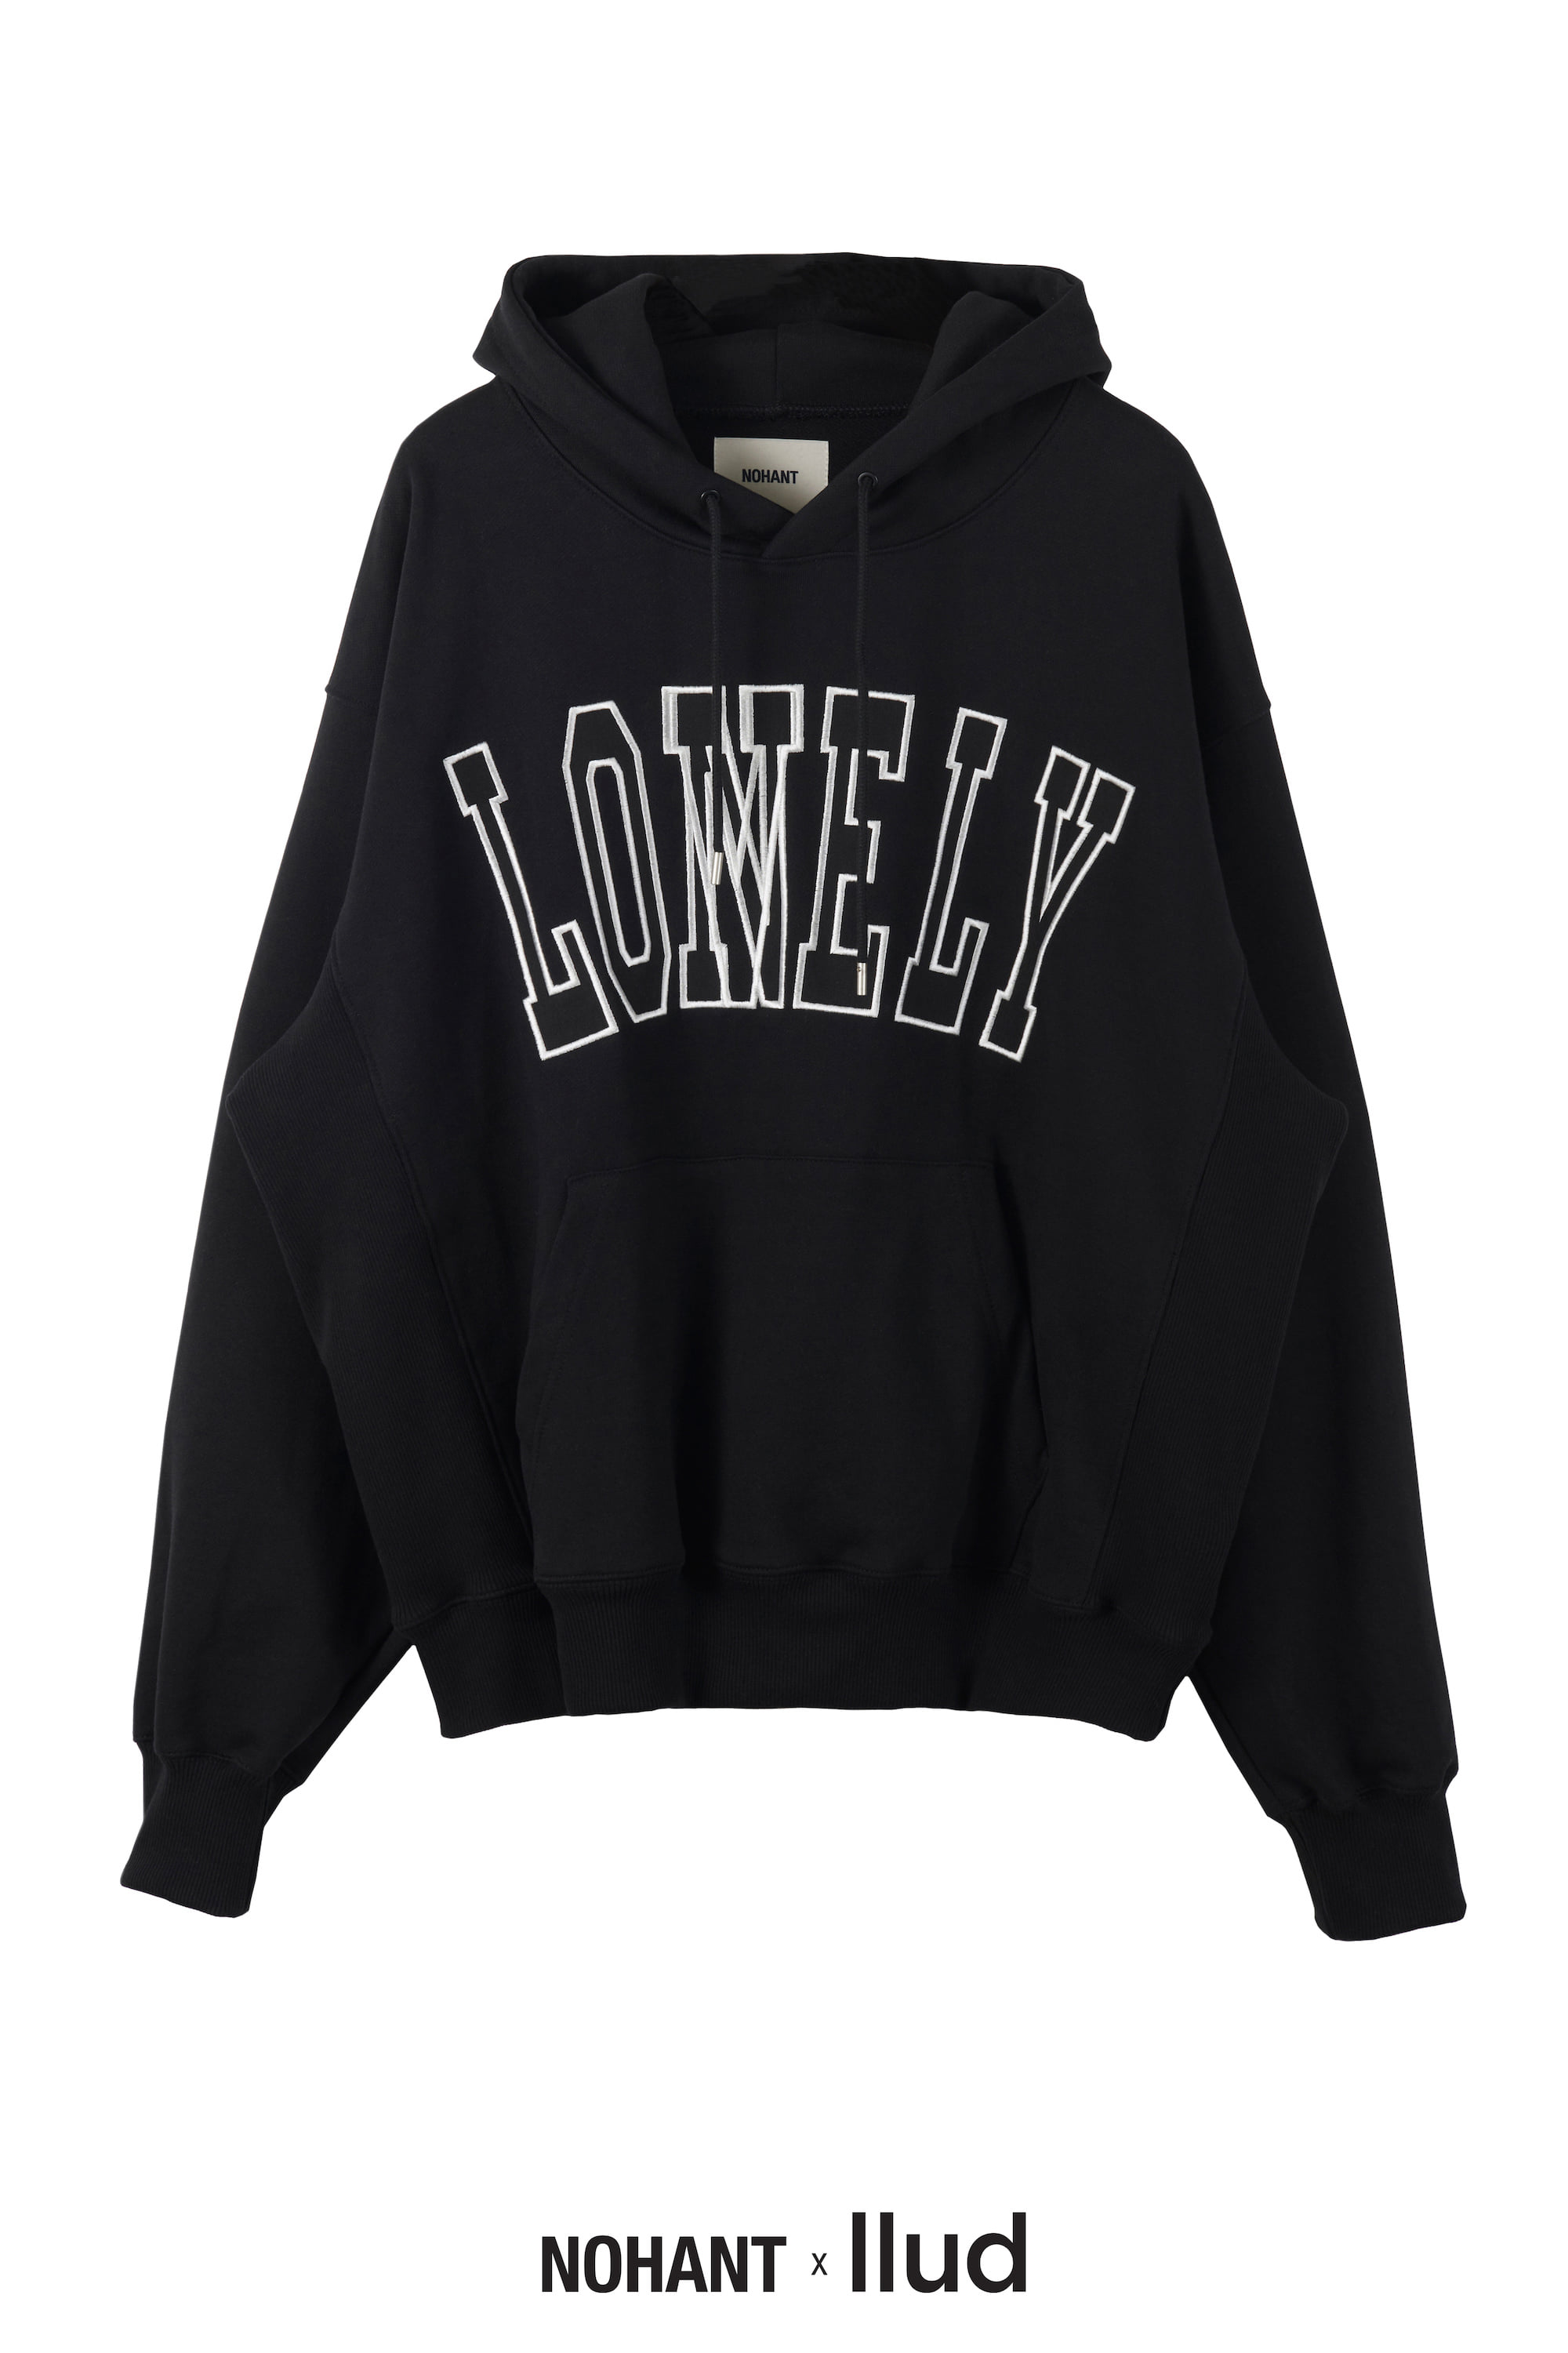 LONELY/LOVELY HOODIE BLACK